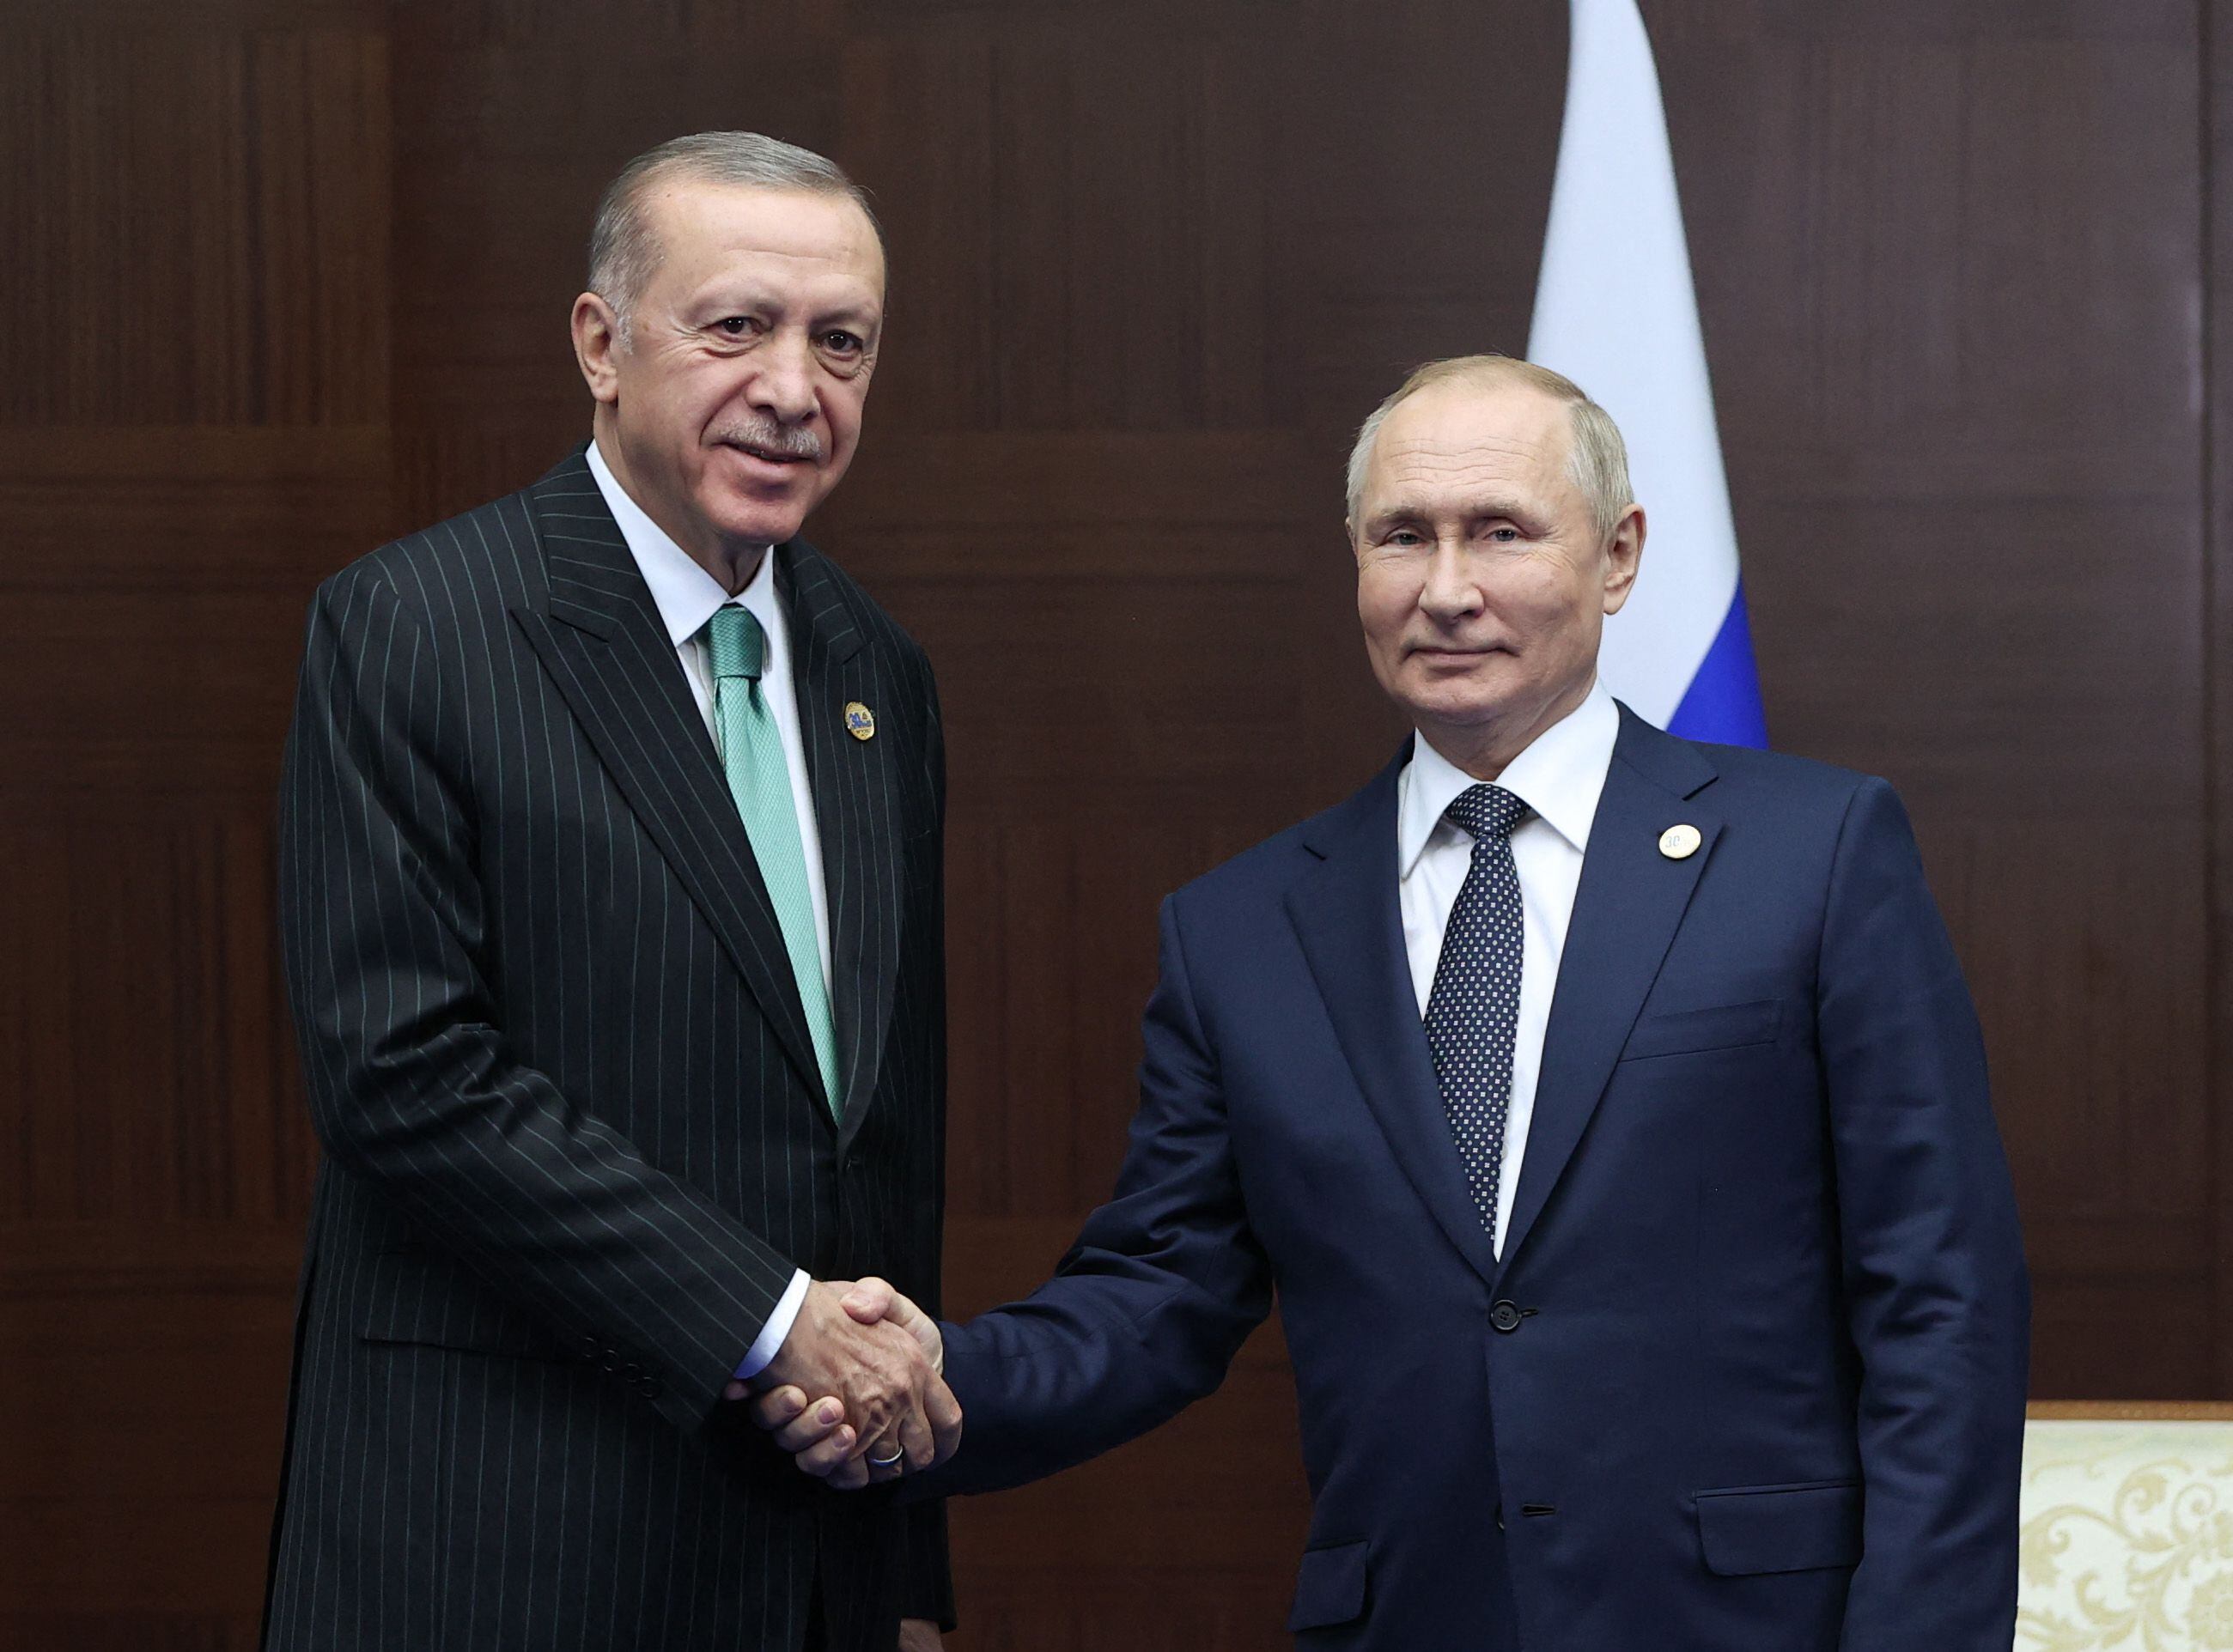 Turkish President Recep Tayyip Erdogan (left) meets with Russian President Vladimir Putin on the sidelines of the Conference on Interaction and Confidence Building Measures in Asia (CICA), on October 13, 2022. (Photo : PRESIDENTIAL PRESS SERVICE OF TURKEY / AFP).